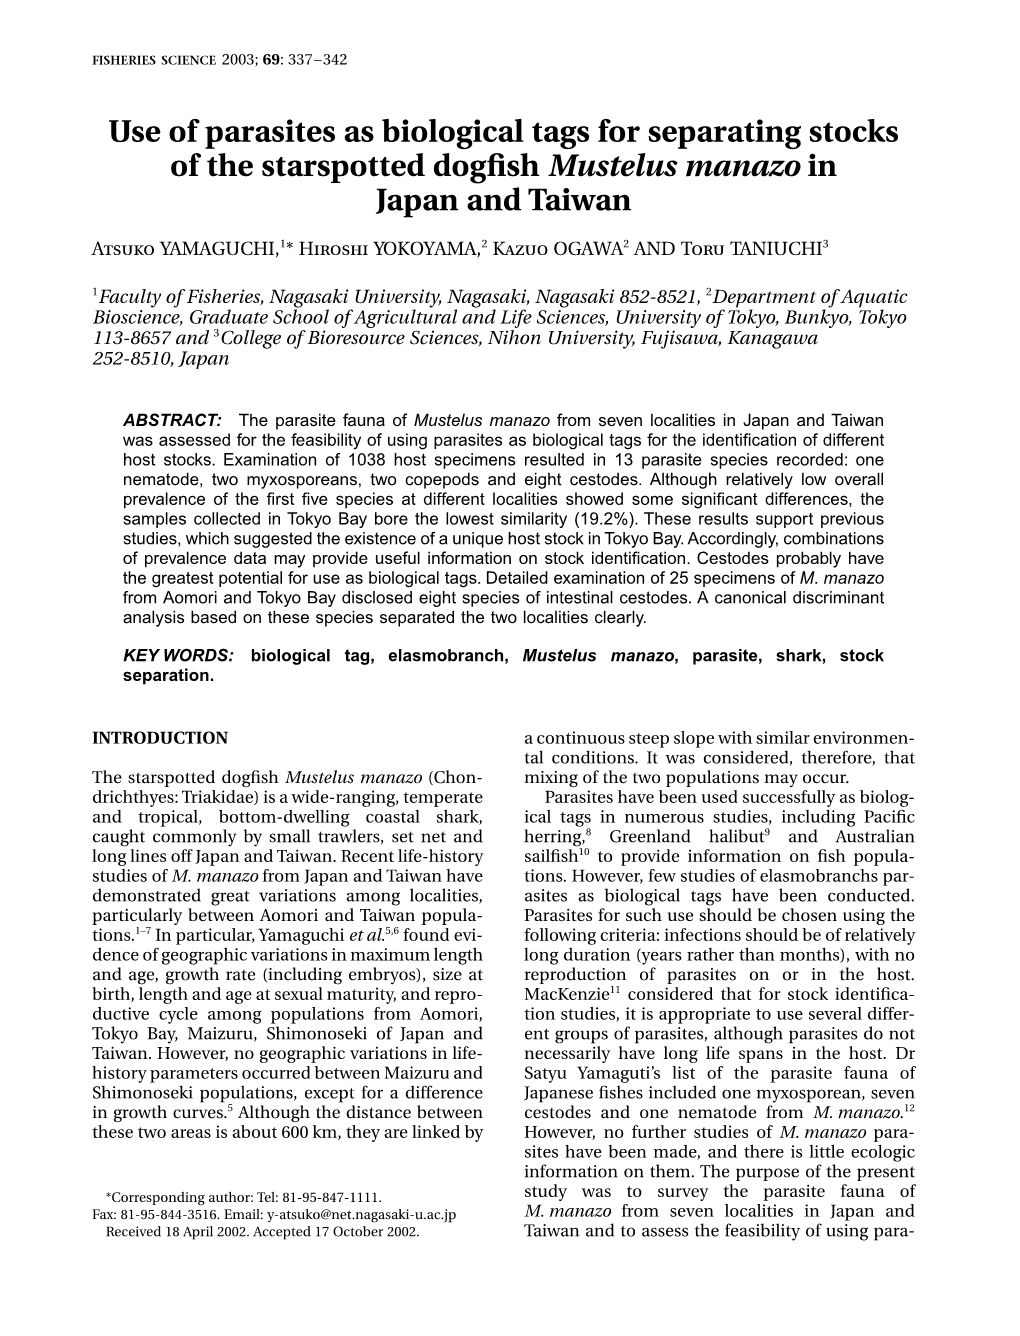 Use of Parasites As Biological Tags for Separating Stocks of the Starspotted Dogﬁsh Mustelus Manazo in Japan and Taiwan